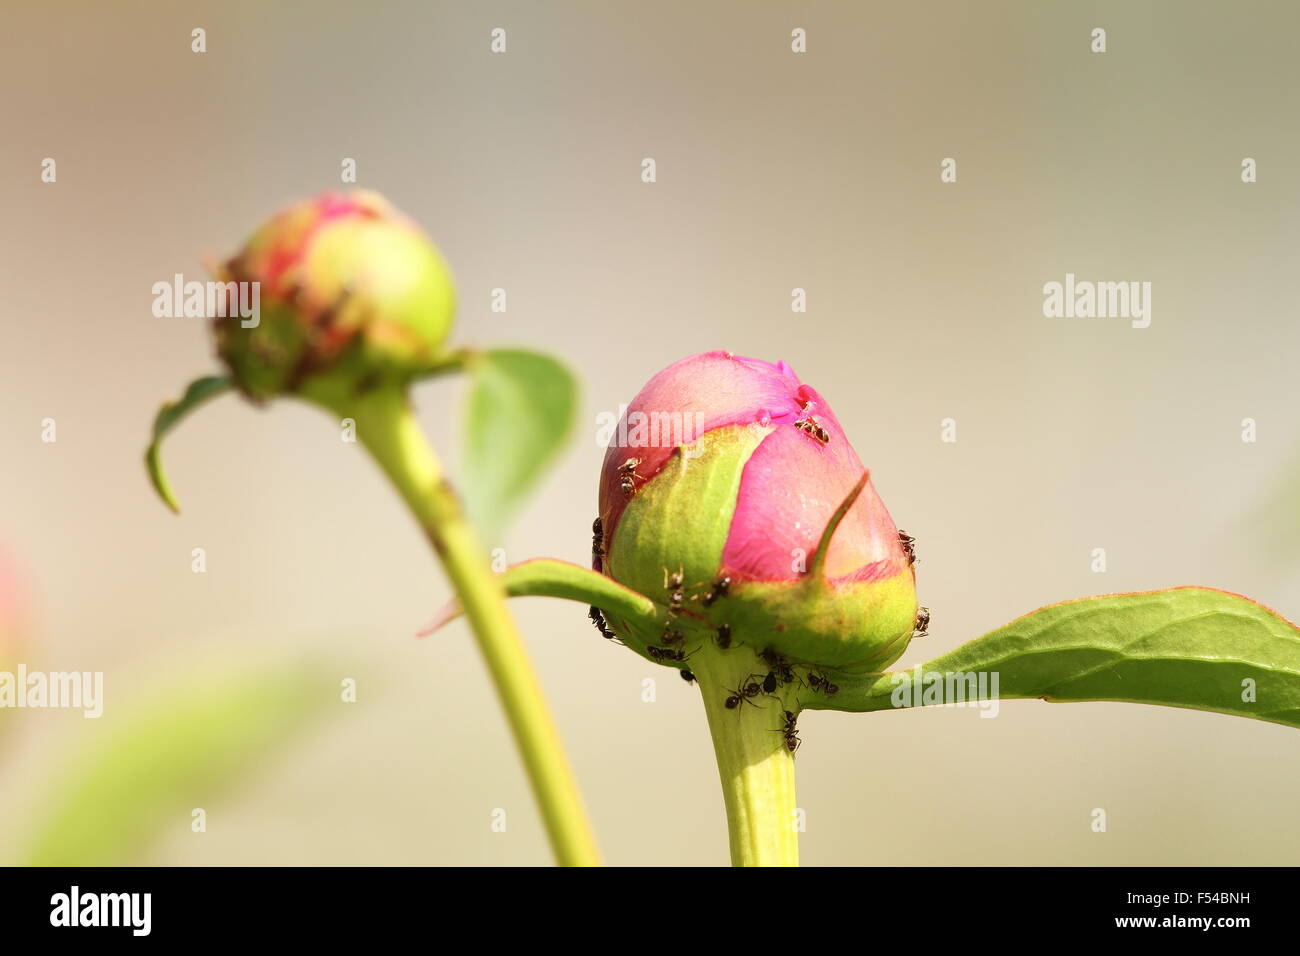 pink peony bud attacked by ants, ornamental garden pest Stock Photo